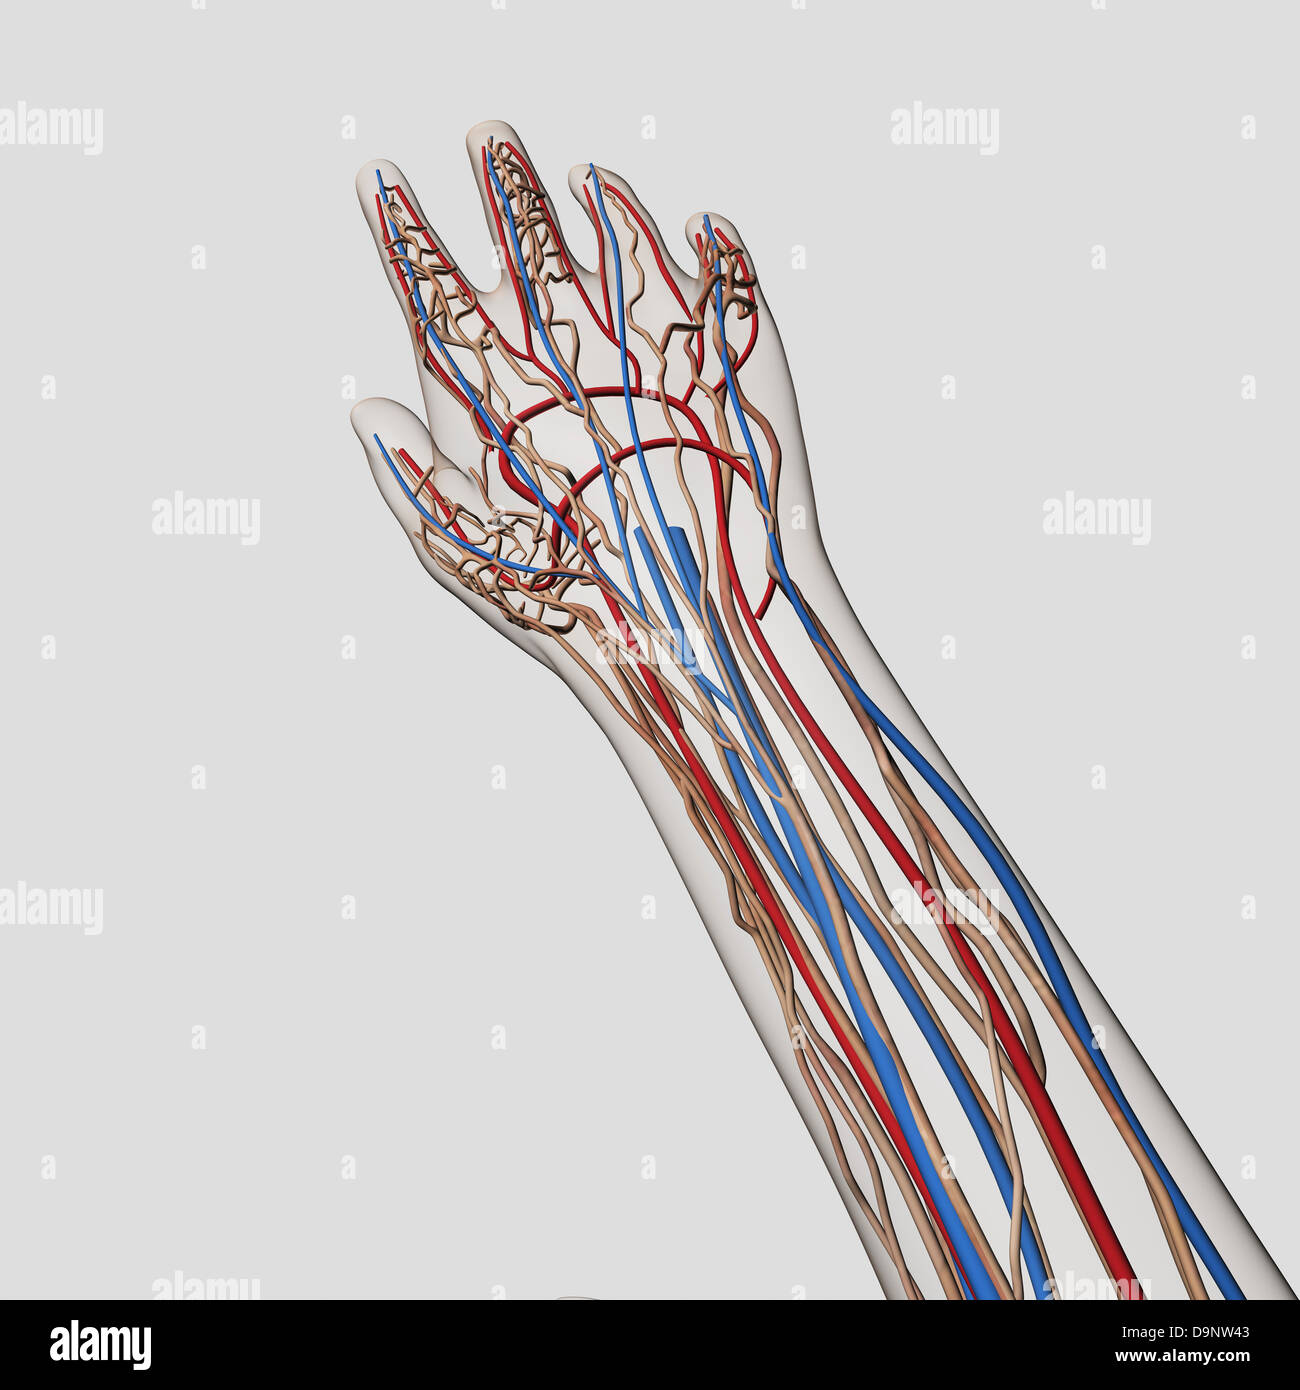 Medical illustration of arteries, veins and lymphatic system in human hand and arm. Stock Photo